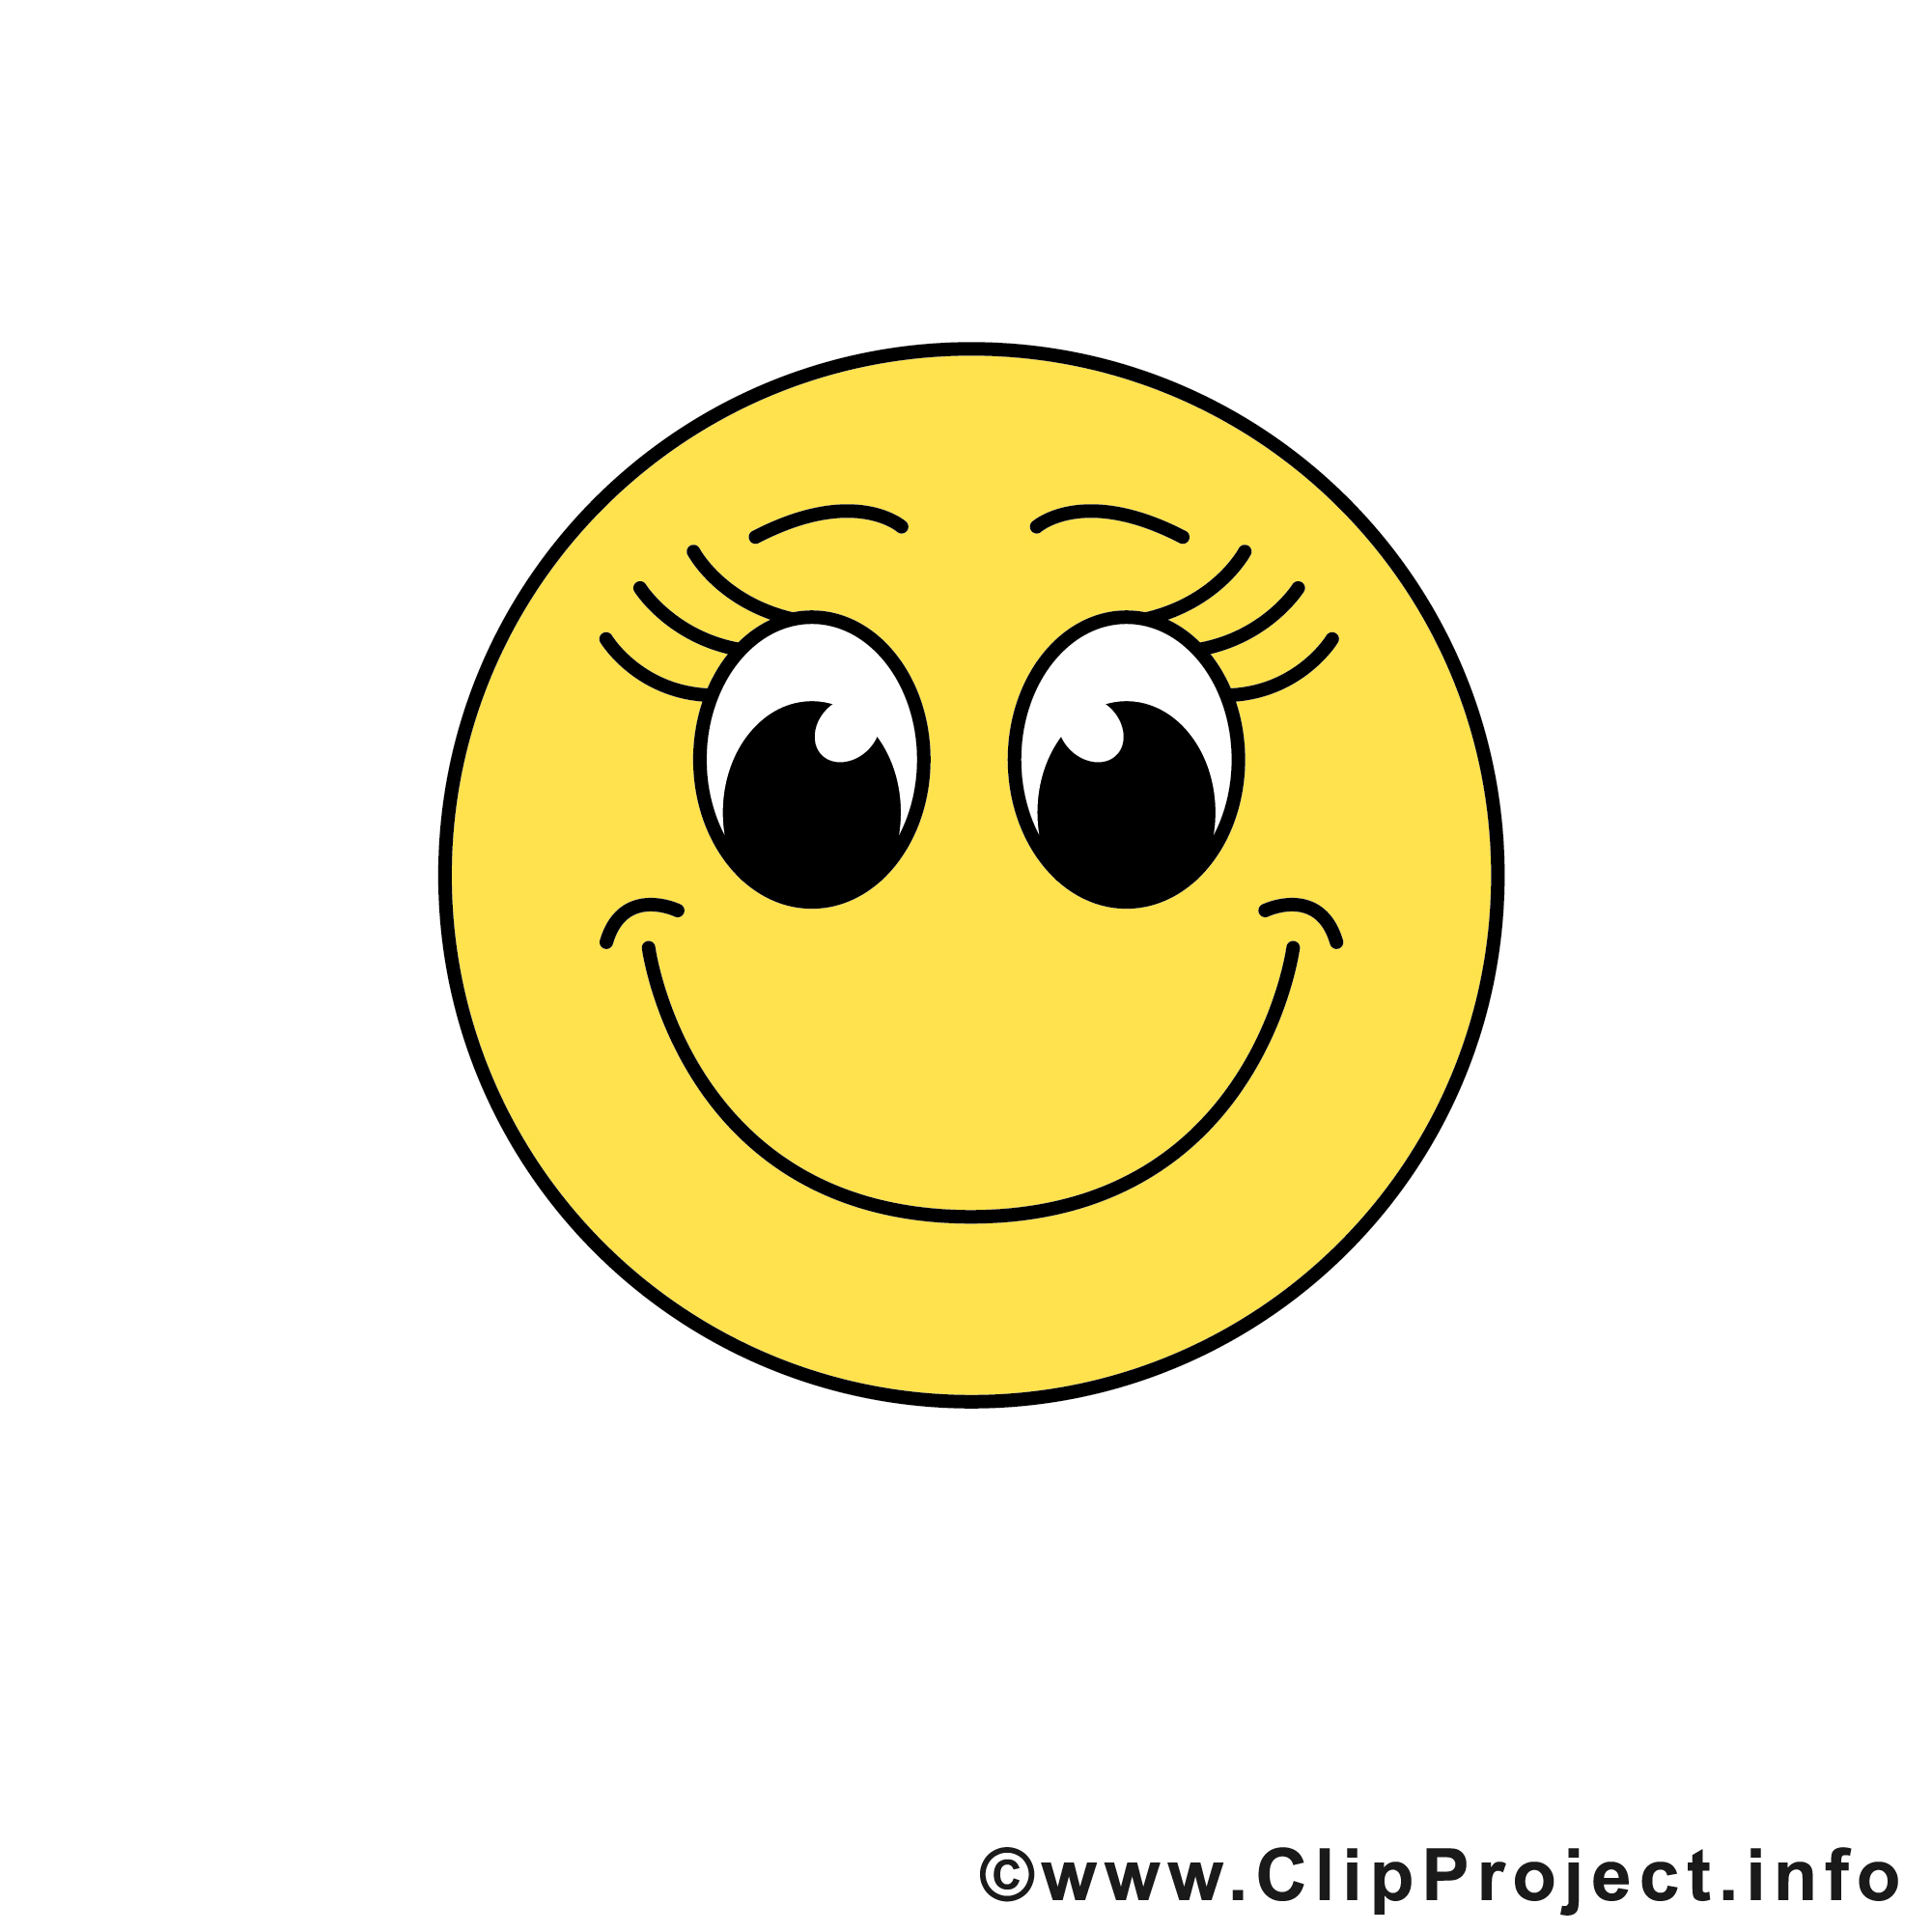 13 Download Smiley Emoticons Images - Emoticons Free Download ...